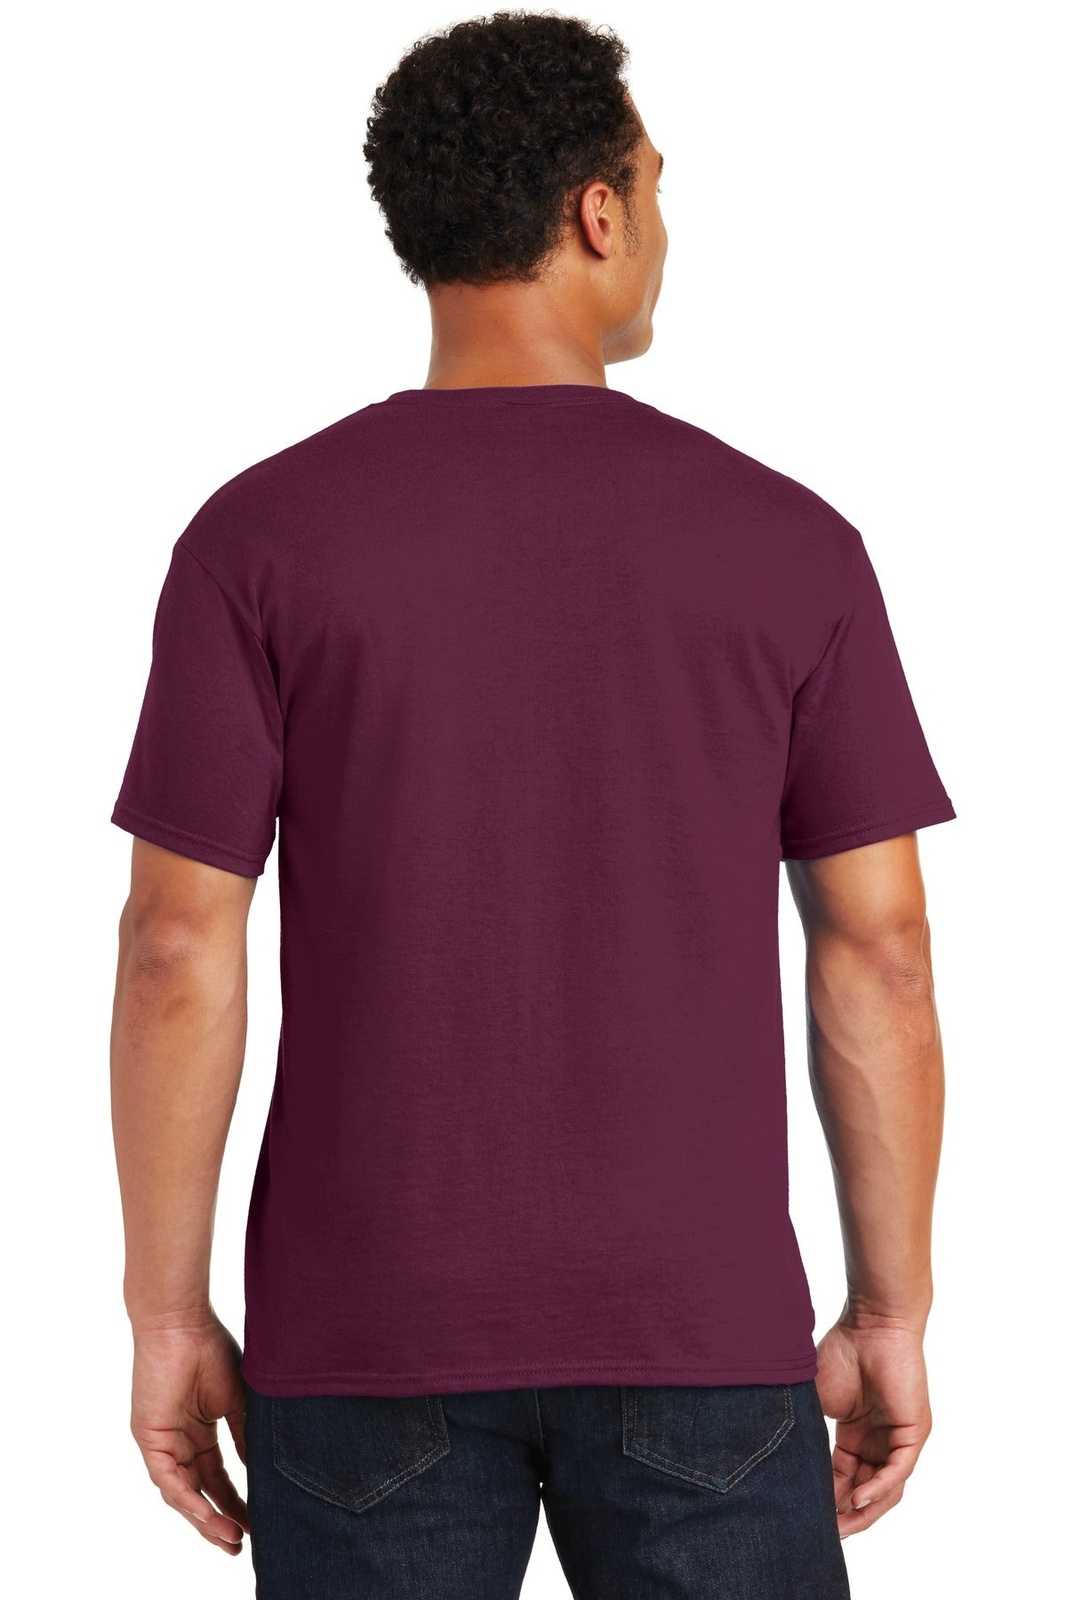 Jerzees 29M Dri-Power Active 50/50 Cotton/Poly T-Shirt - Maroon - HIT a Double